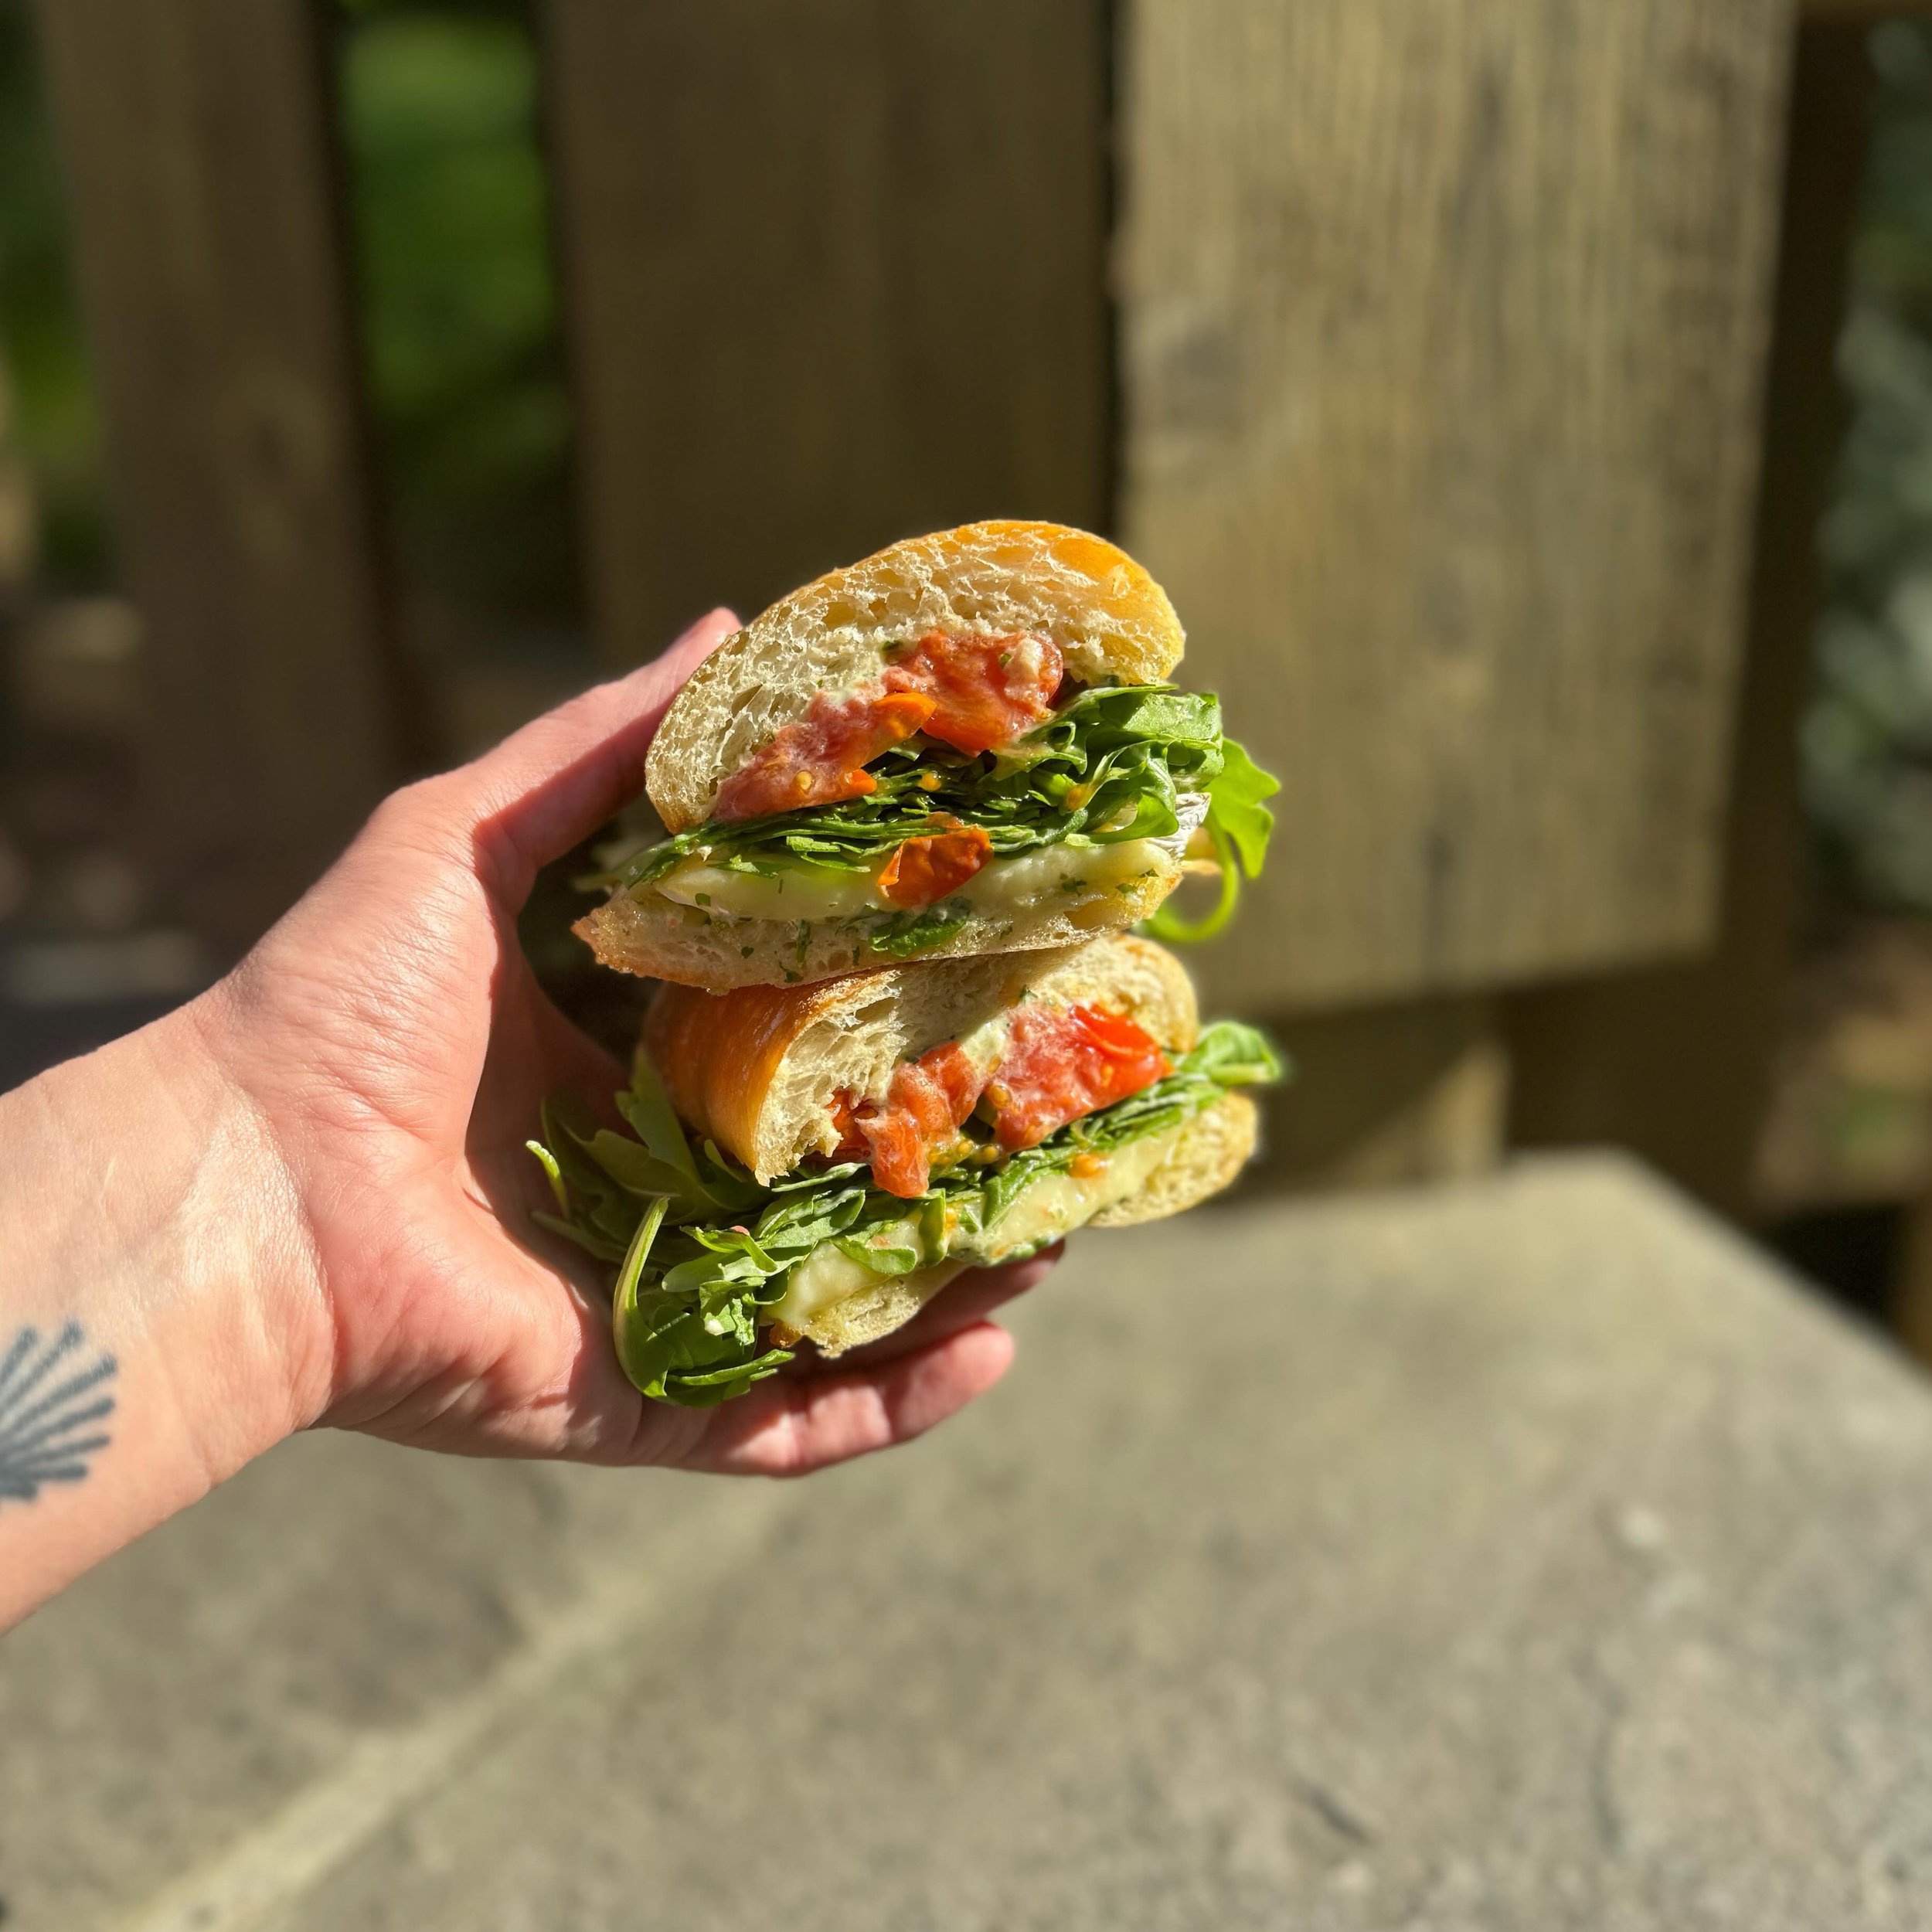 Warm brie and roasted cherry tomato sandwich today! With pesto aioli, arugula, and aged balsamic on butter toasted baguette.

Available today and tomorrow till 3pm!